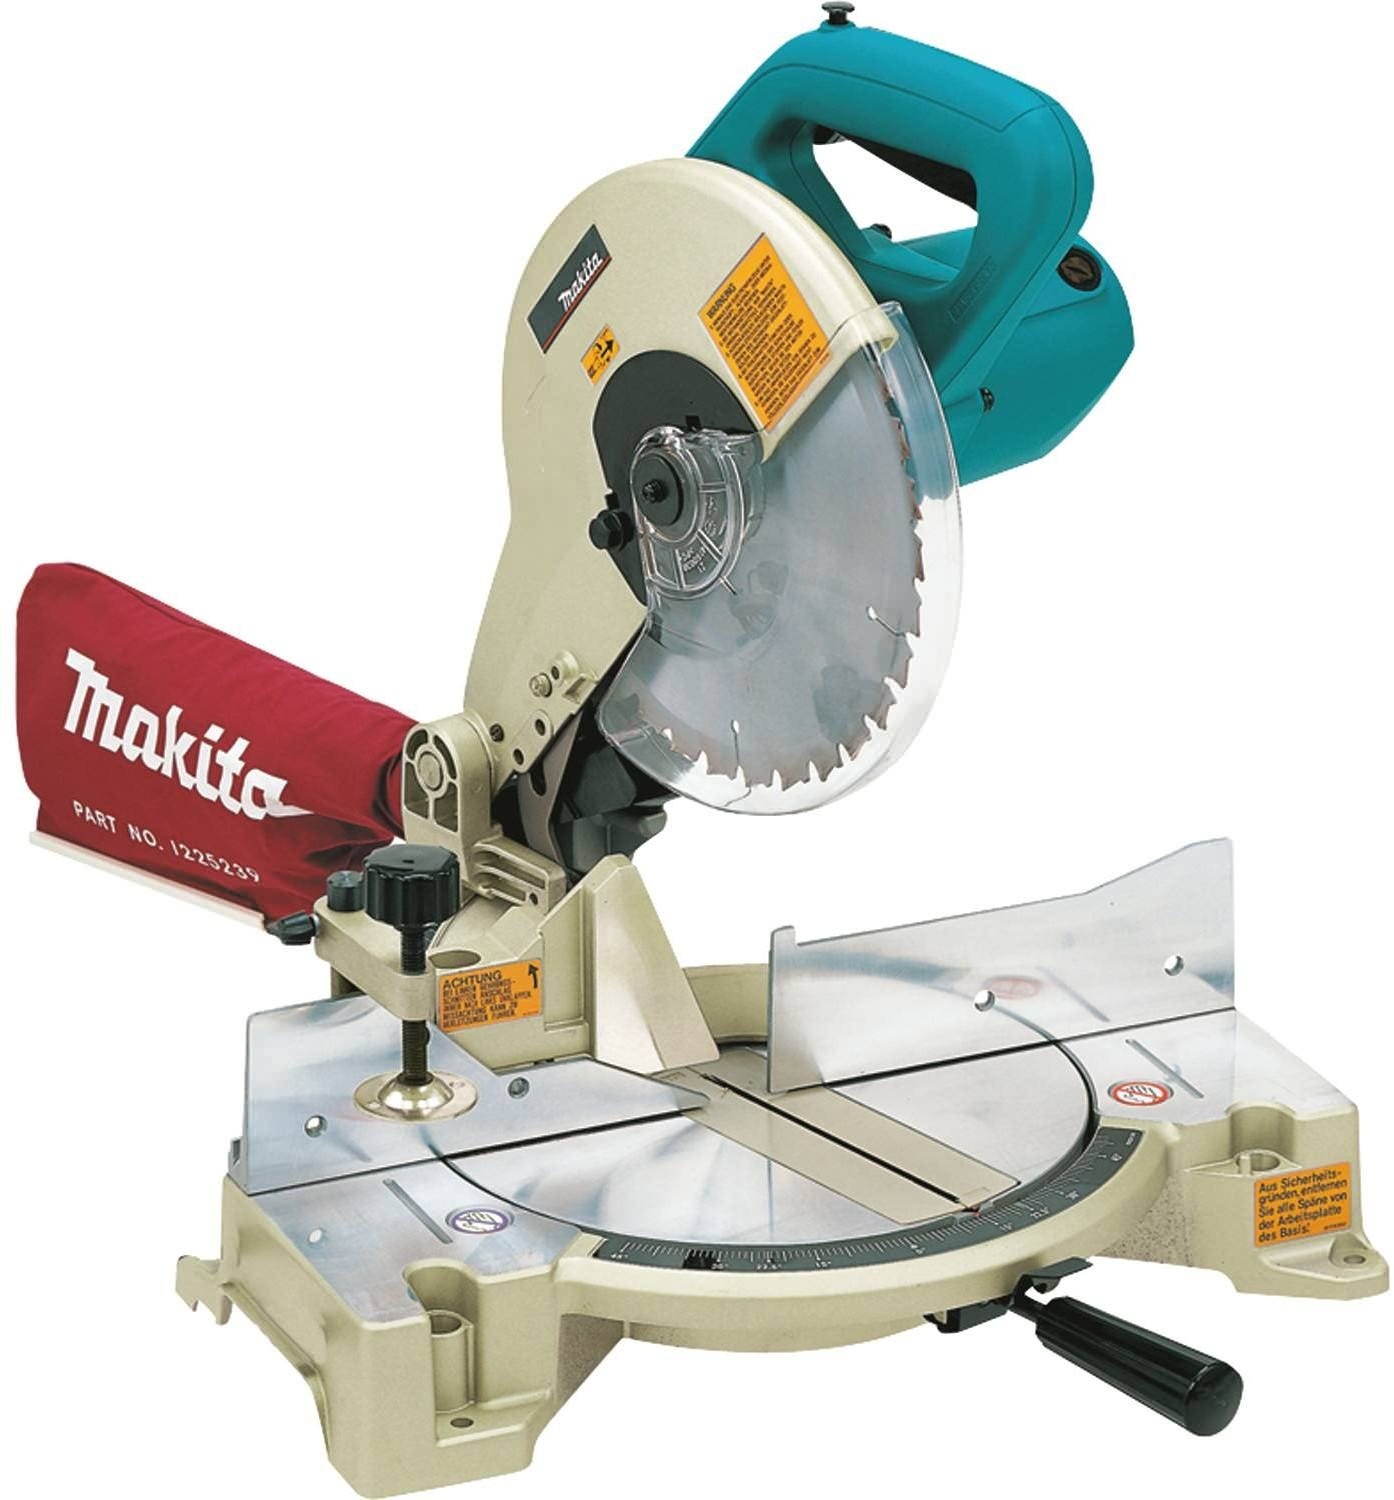 chop saw prices